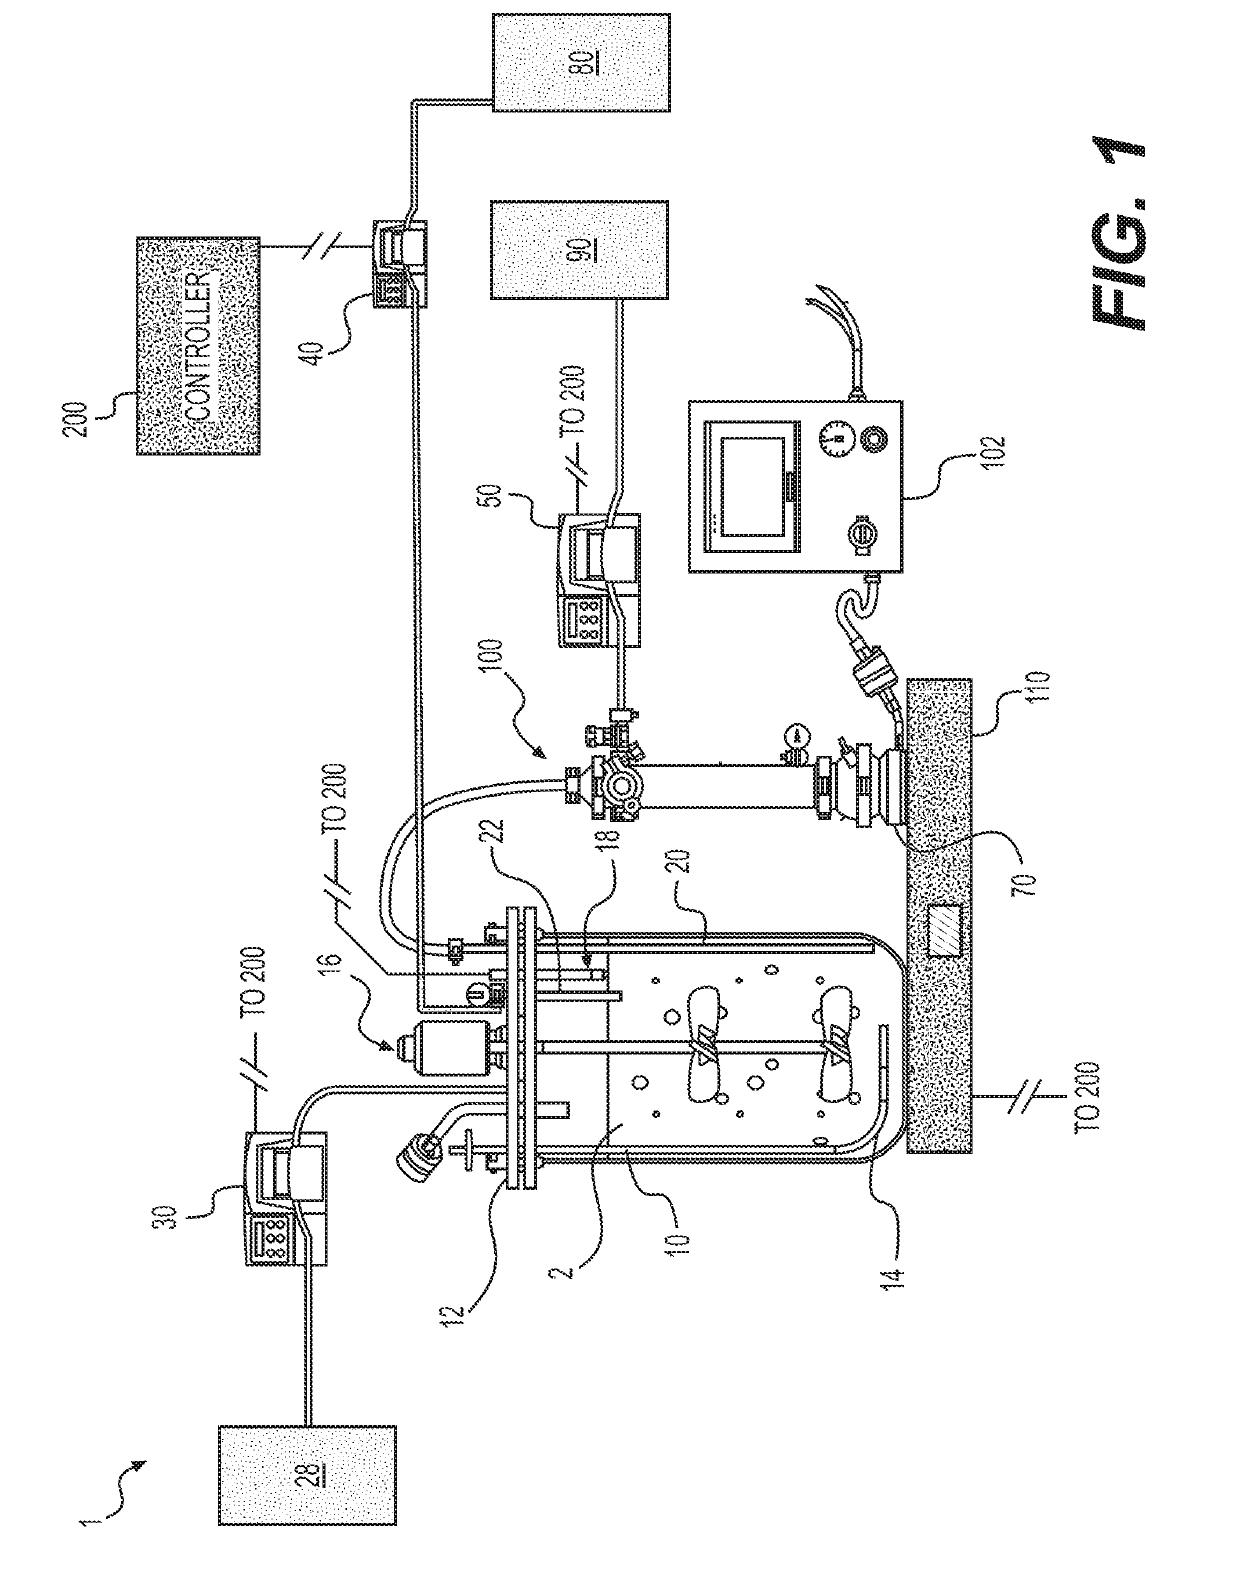 Perfusion bioreactor and related methods of use